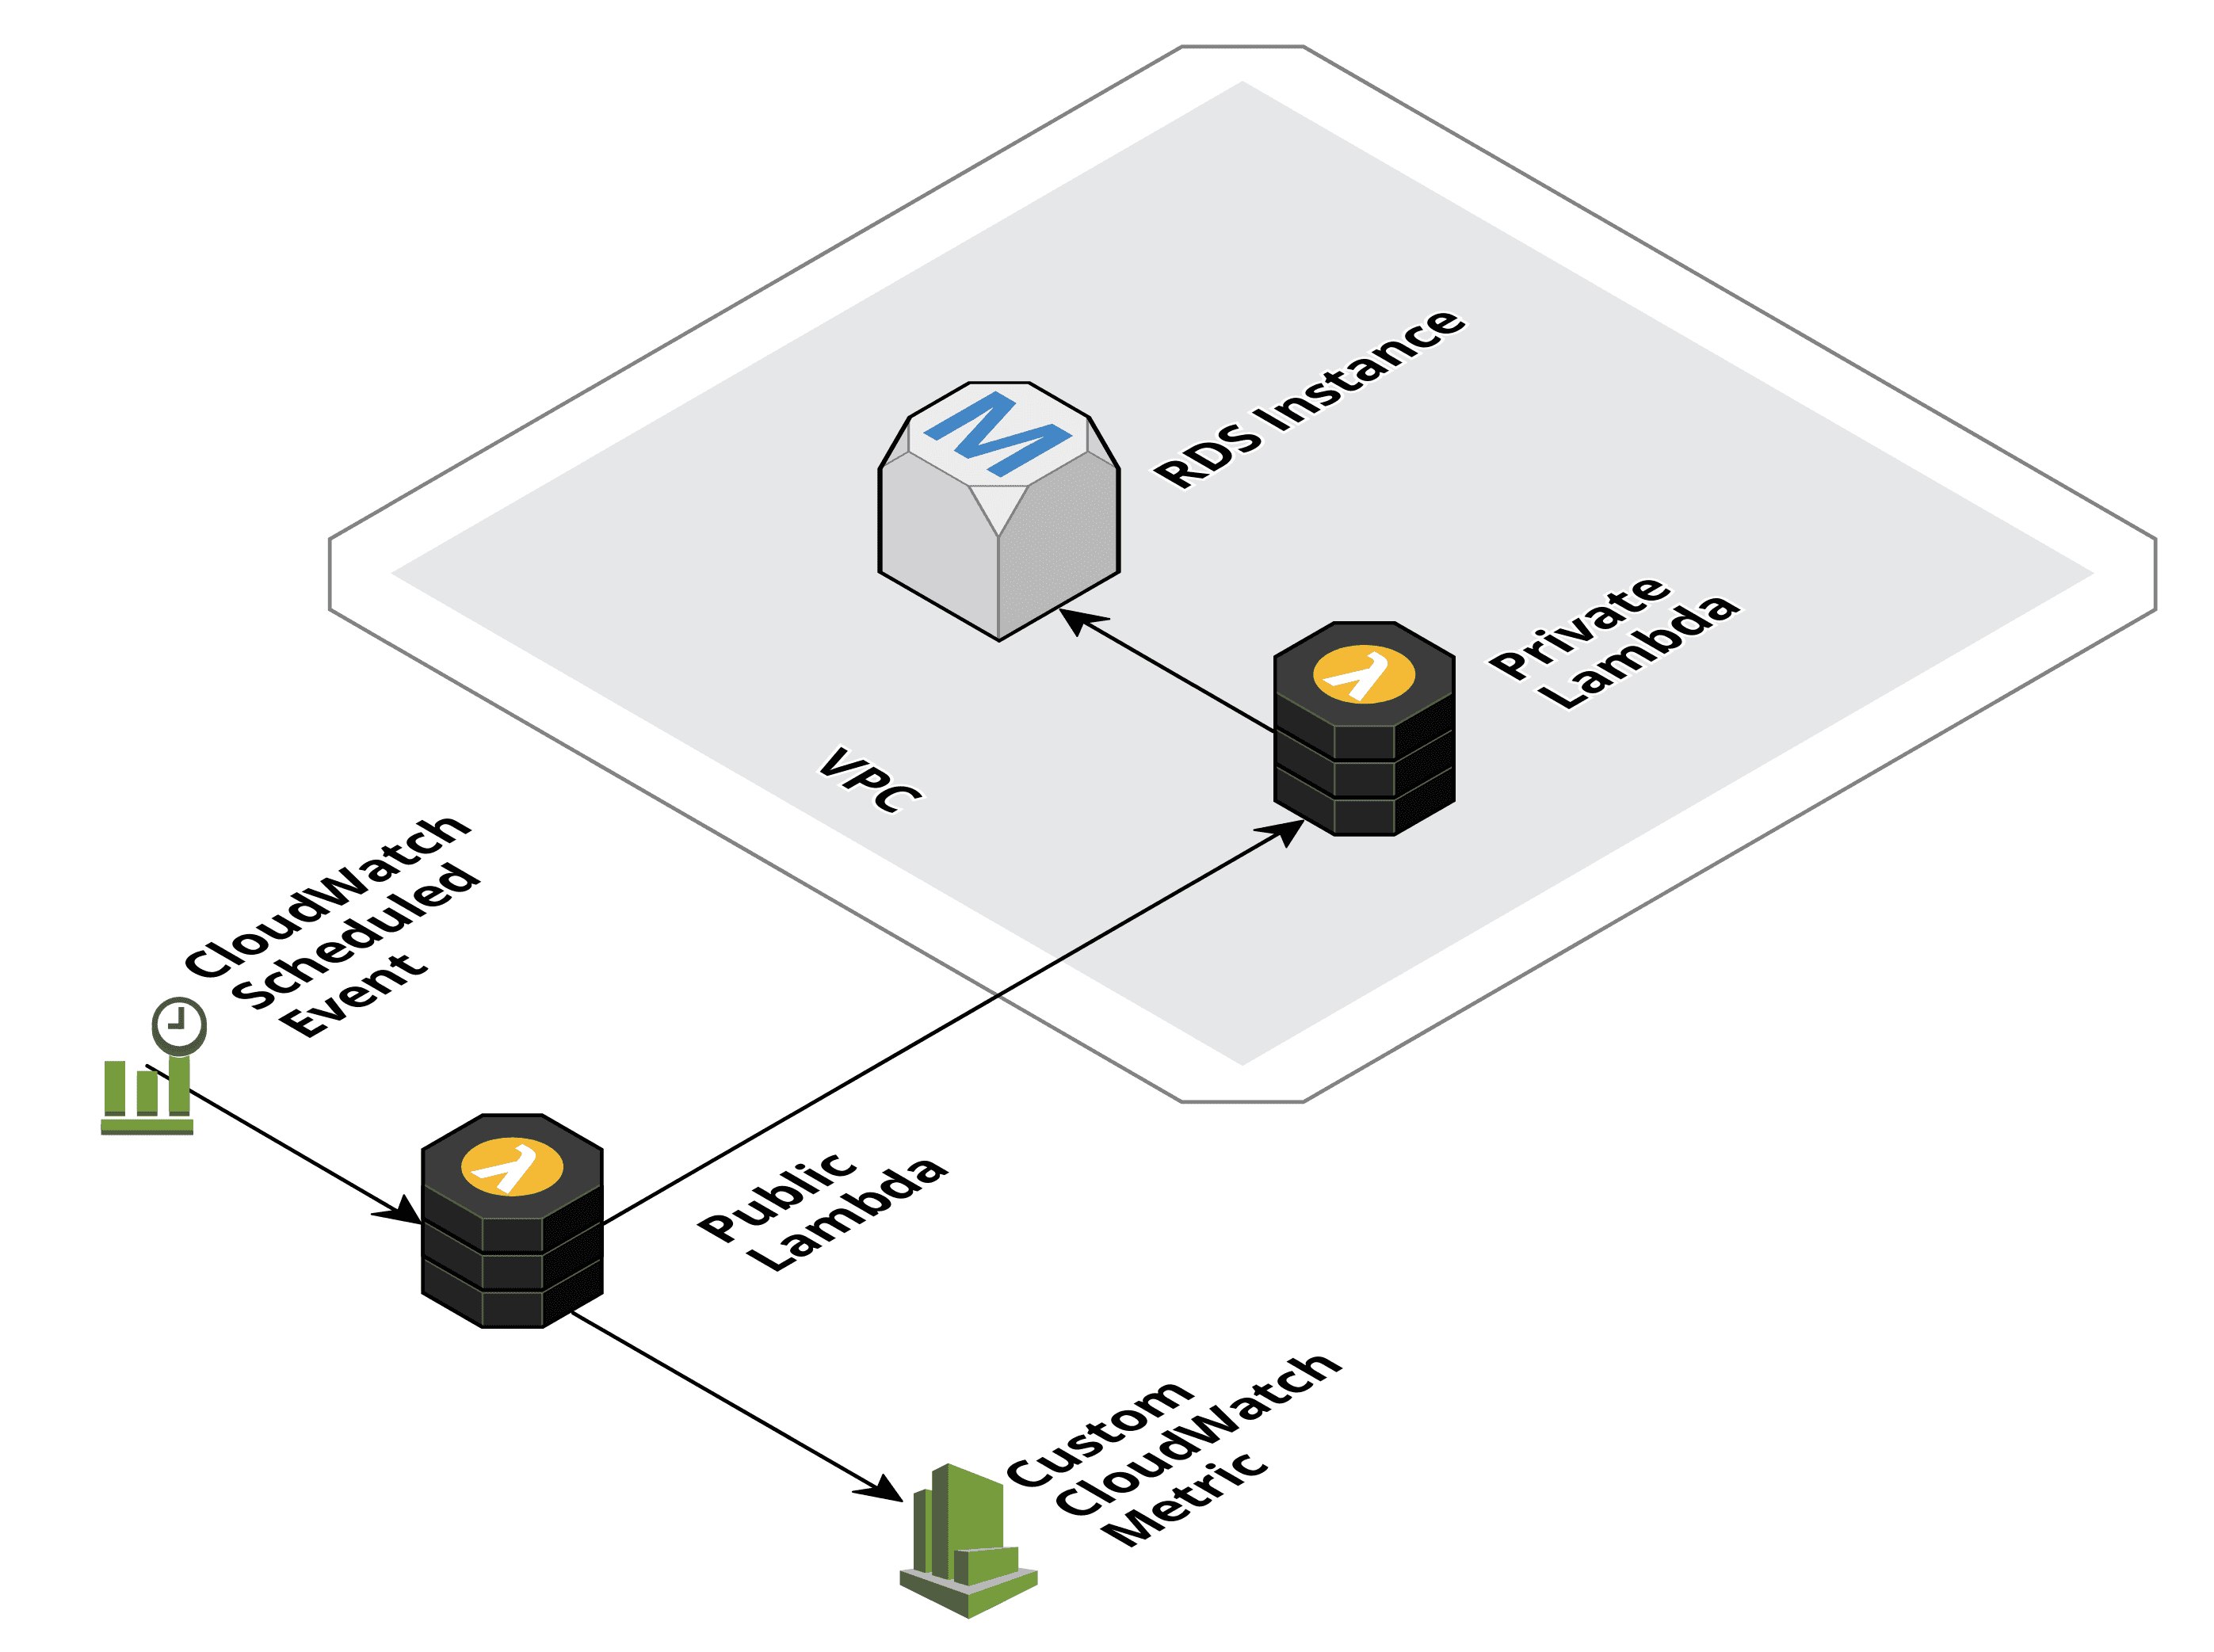 Serverless Pattern for accessing public and private resources